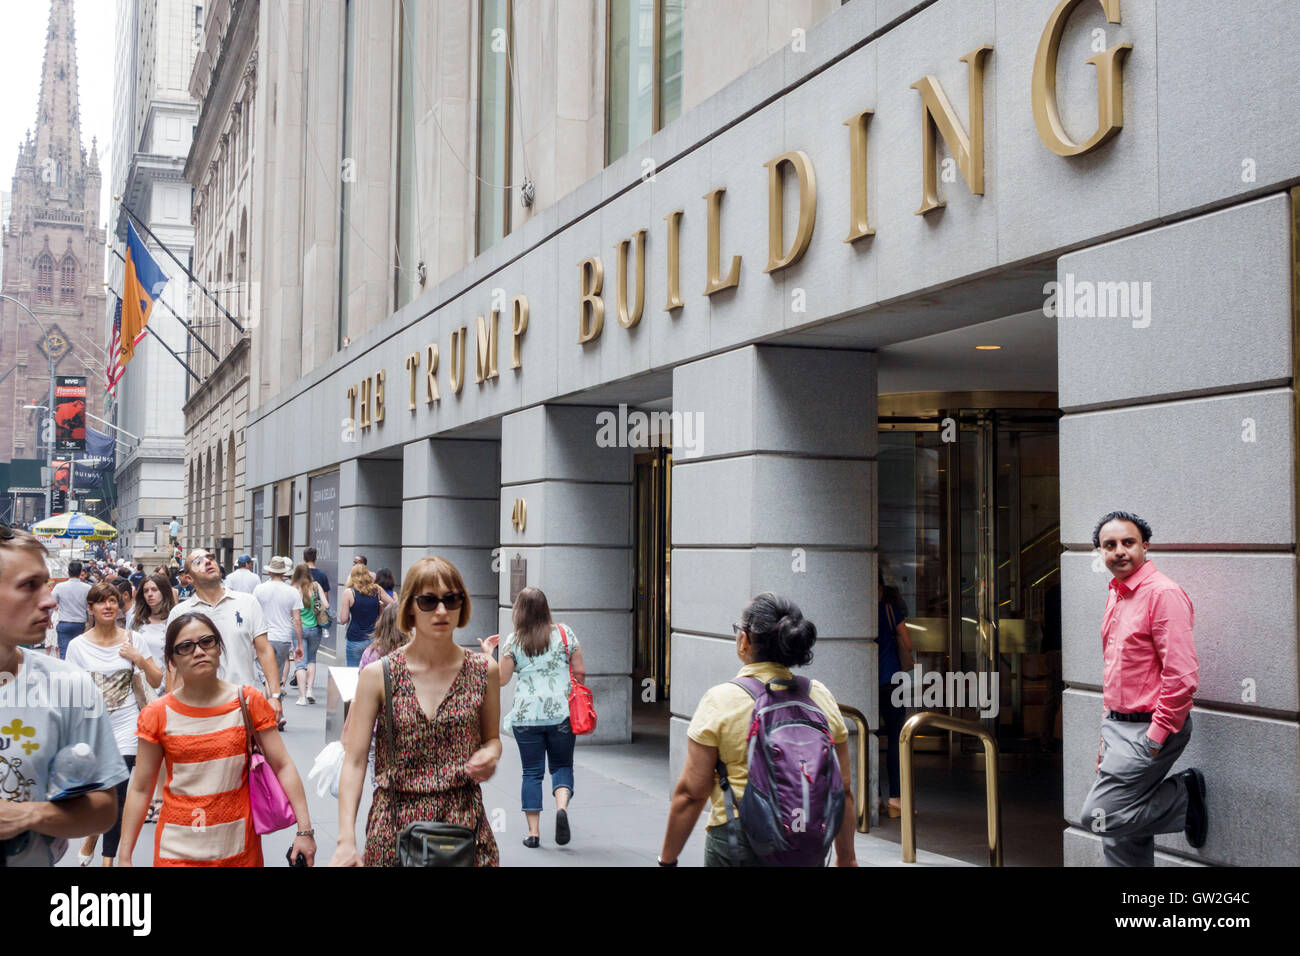 New York City,NY NYC Lower Manhattan,Financial District,Wall Street,Trump building,exterior,sign,Asian adult adults,woman female women,man men male,NY Stock Photo